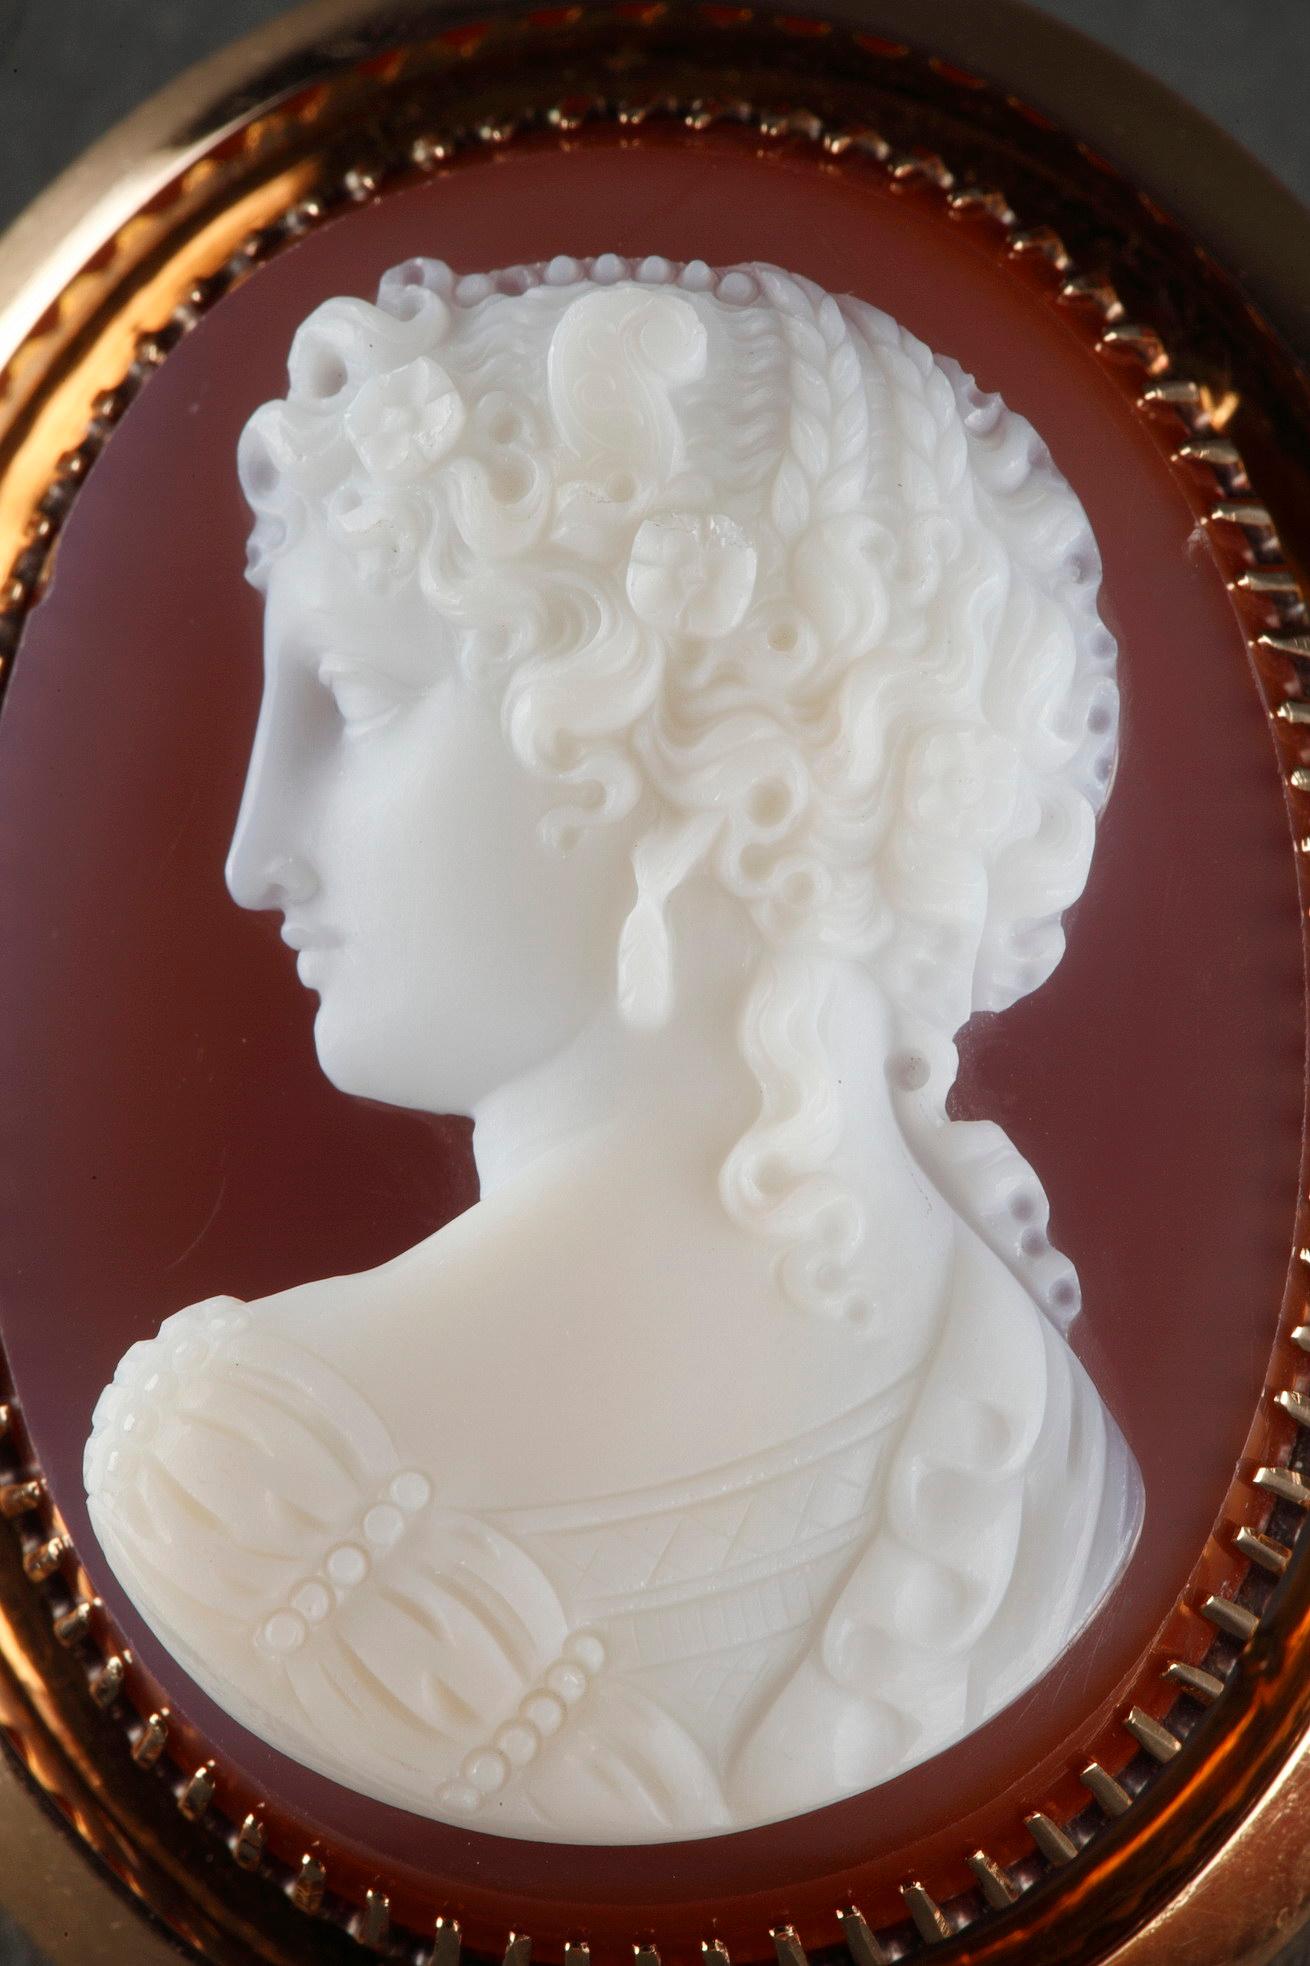 Pink Agate cameo depicting the bust of a young womanwith a Greek profile and looking on the left. She is wrapped in a tunic embellished with pearls. This hard stone is set in a gold frame.

If the art of the size of fine stone has existed since